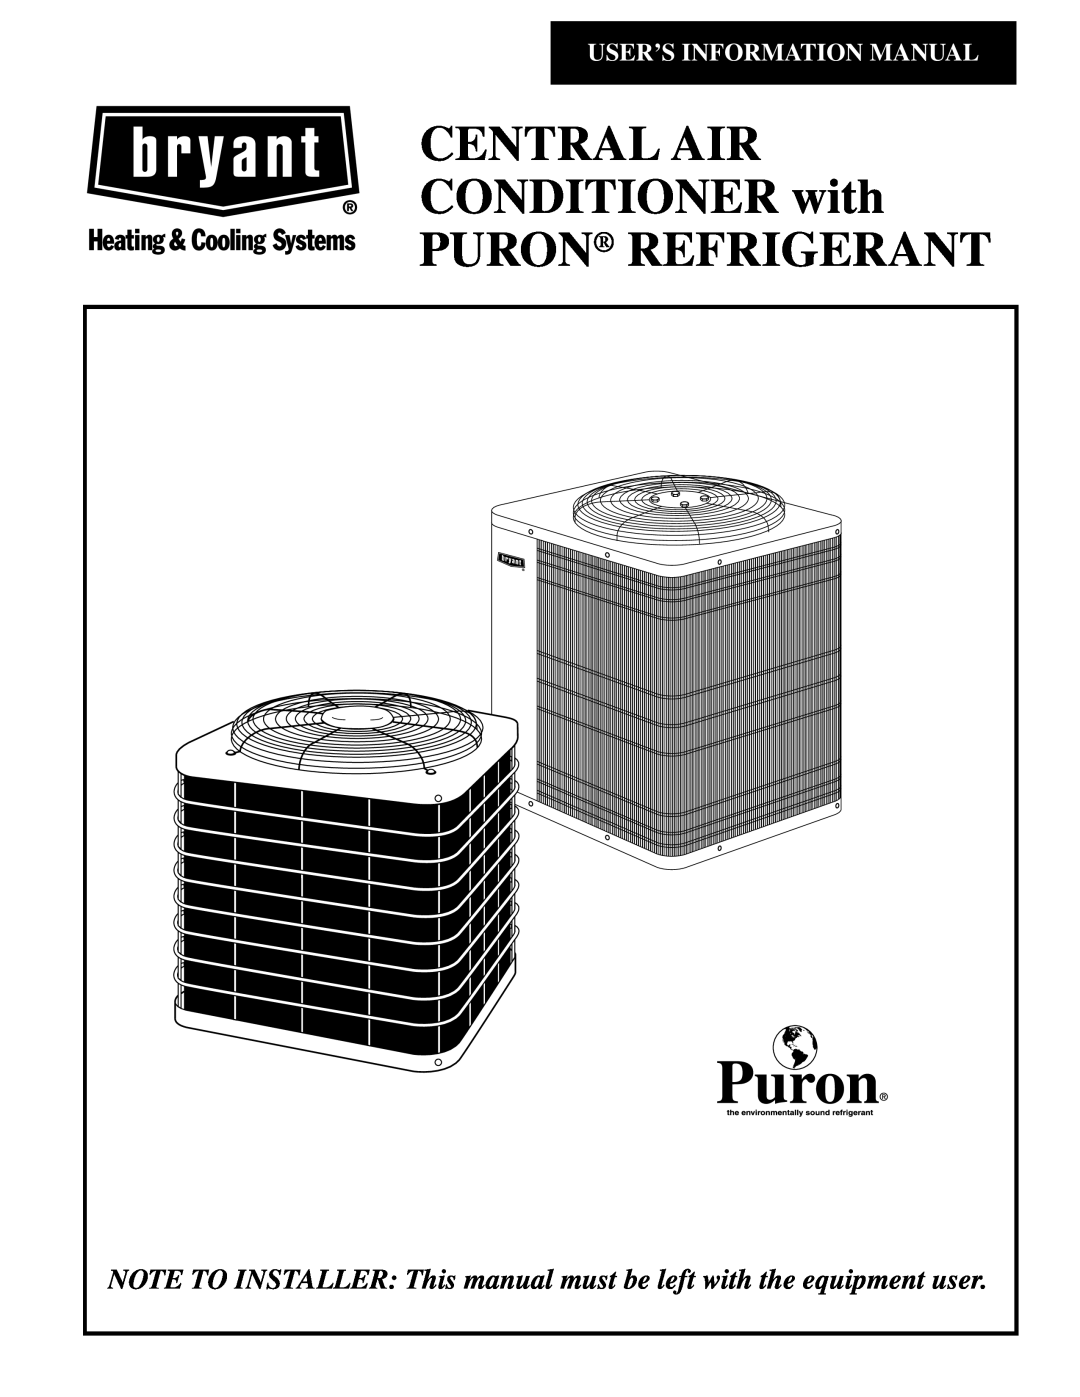 Bryant CENTRAL AIR CONDITIONER with PURON REFRIGERANT manual User’S Information Manual 